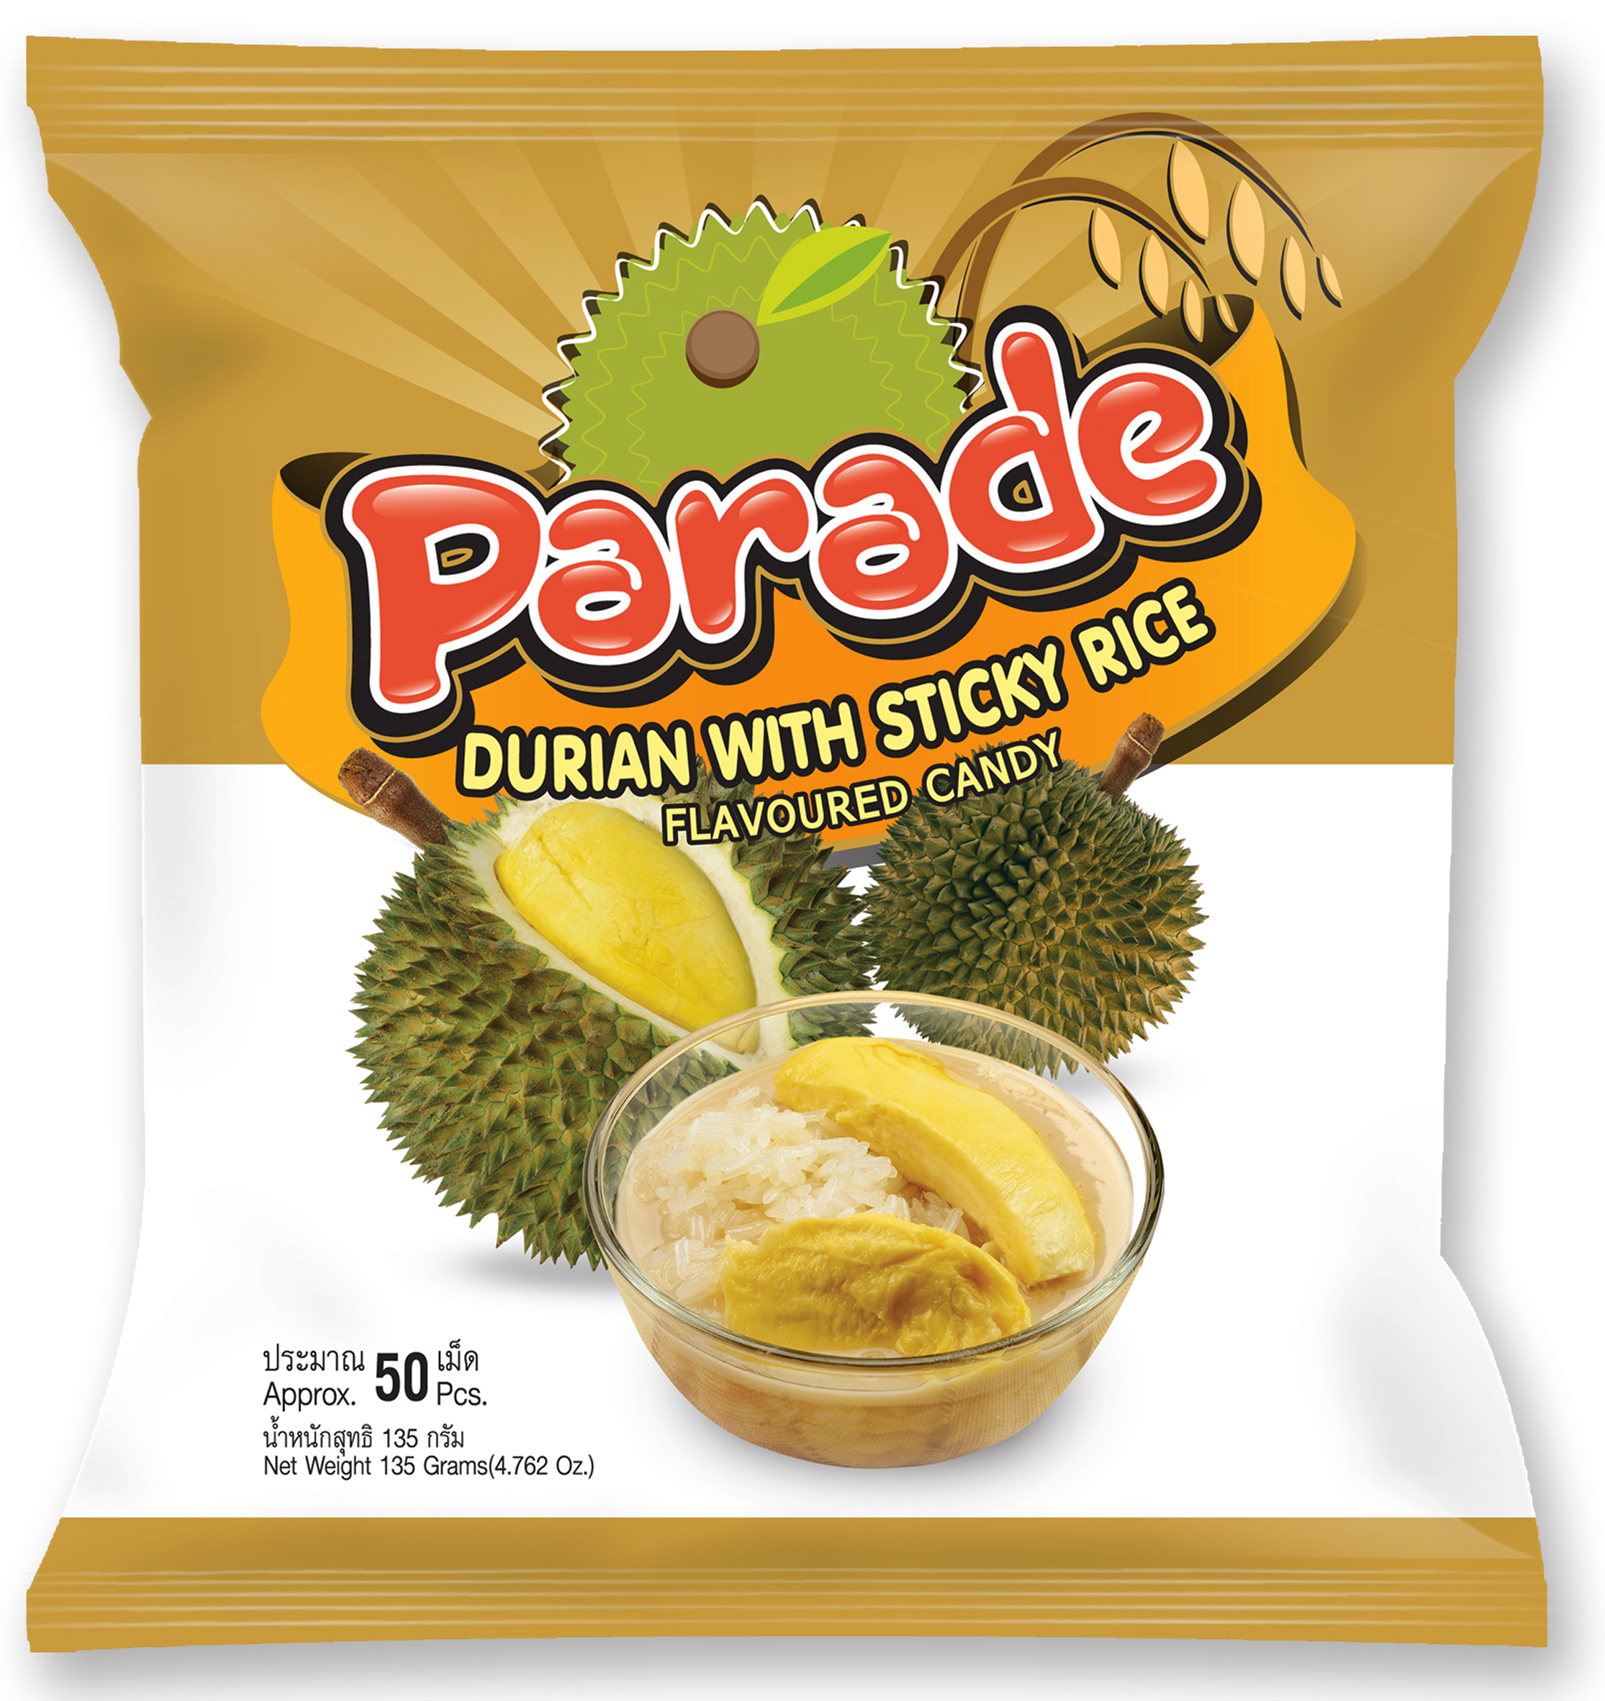 Parade Durian with Sticky Rice Flavoured Candy